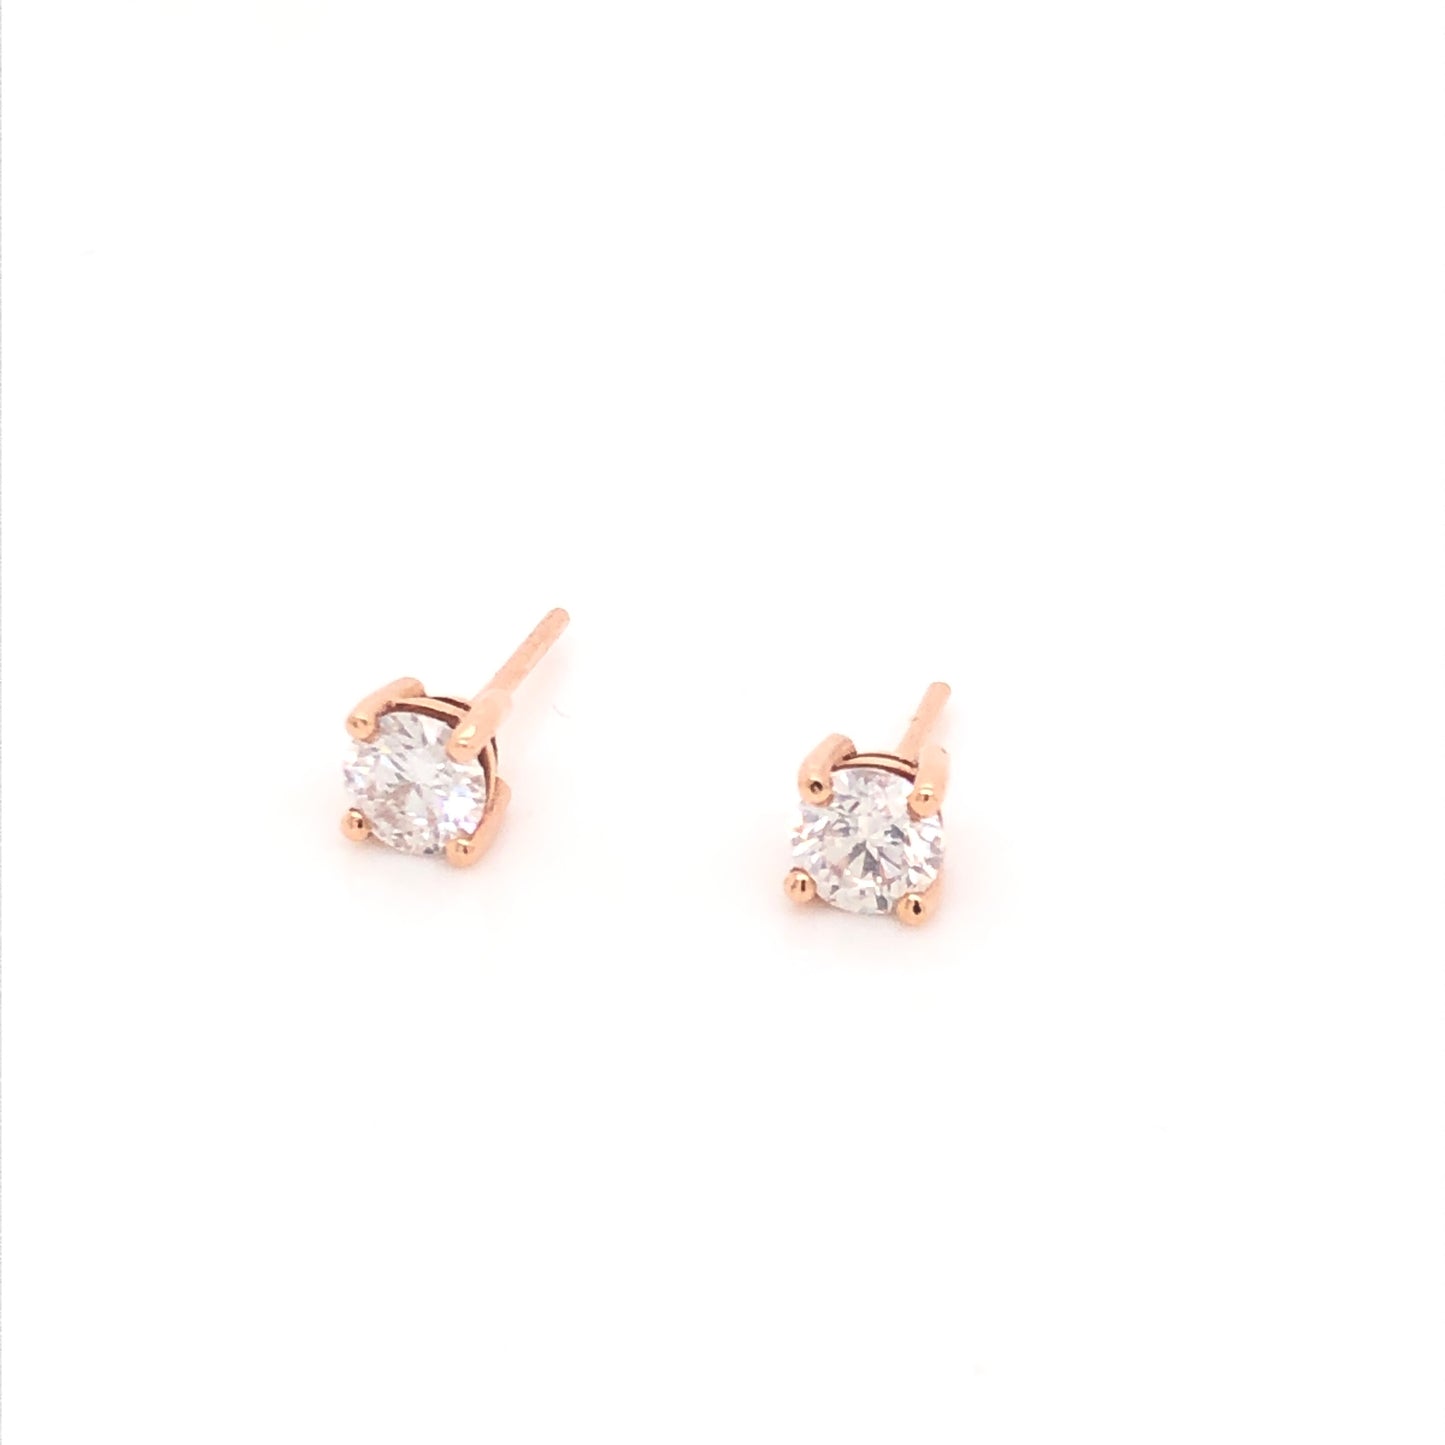 Load image into Gallery viewer, Diamond Earrings
